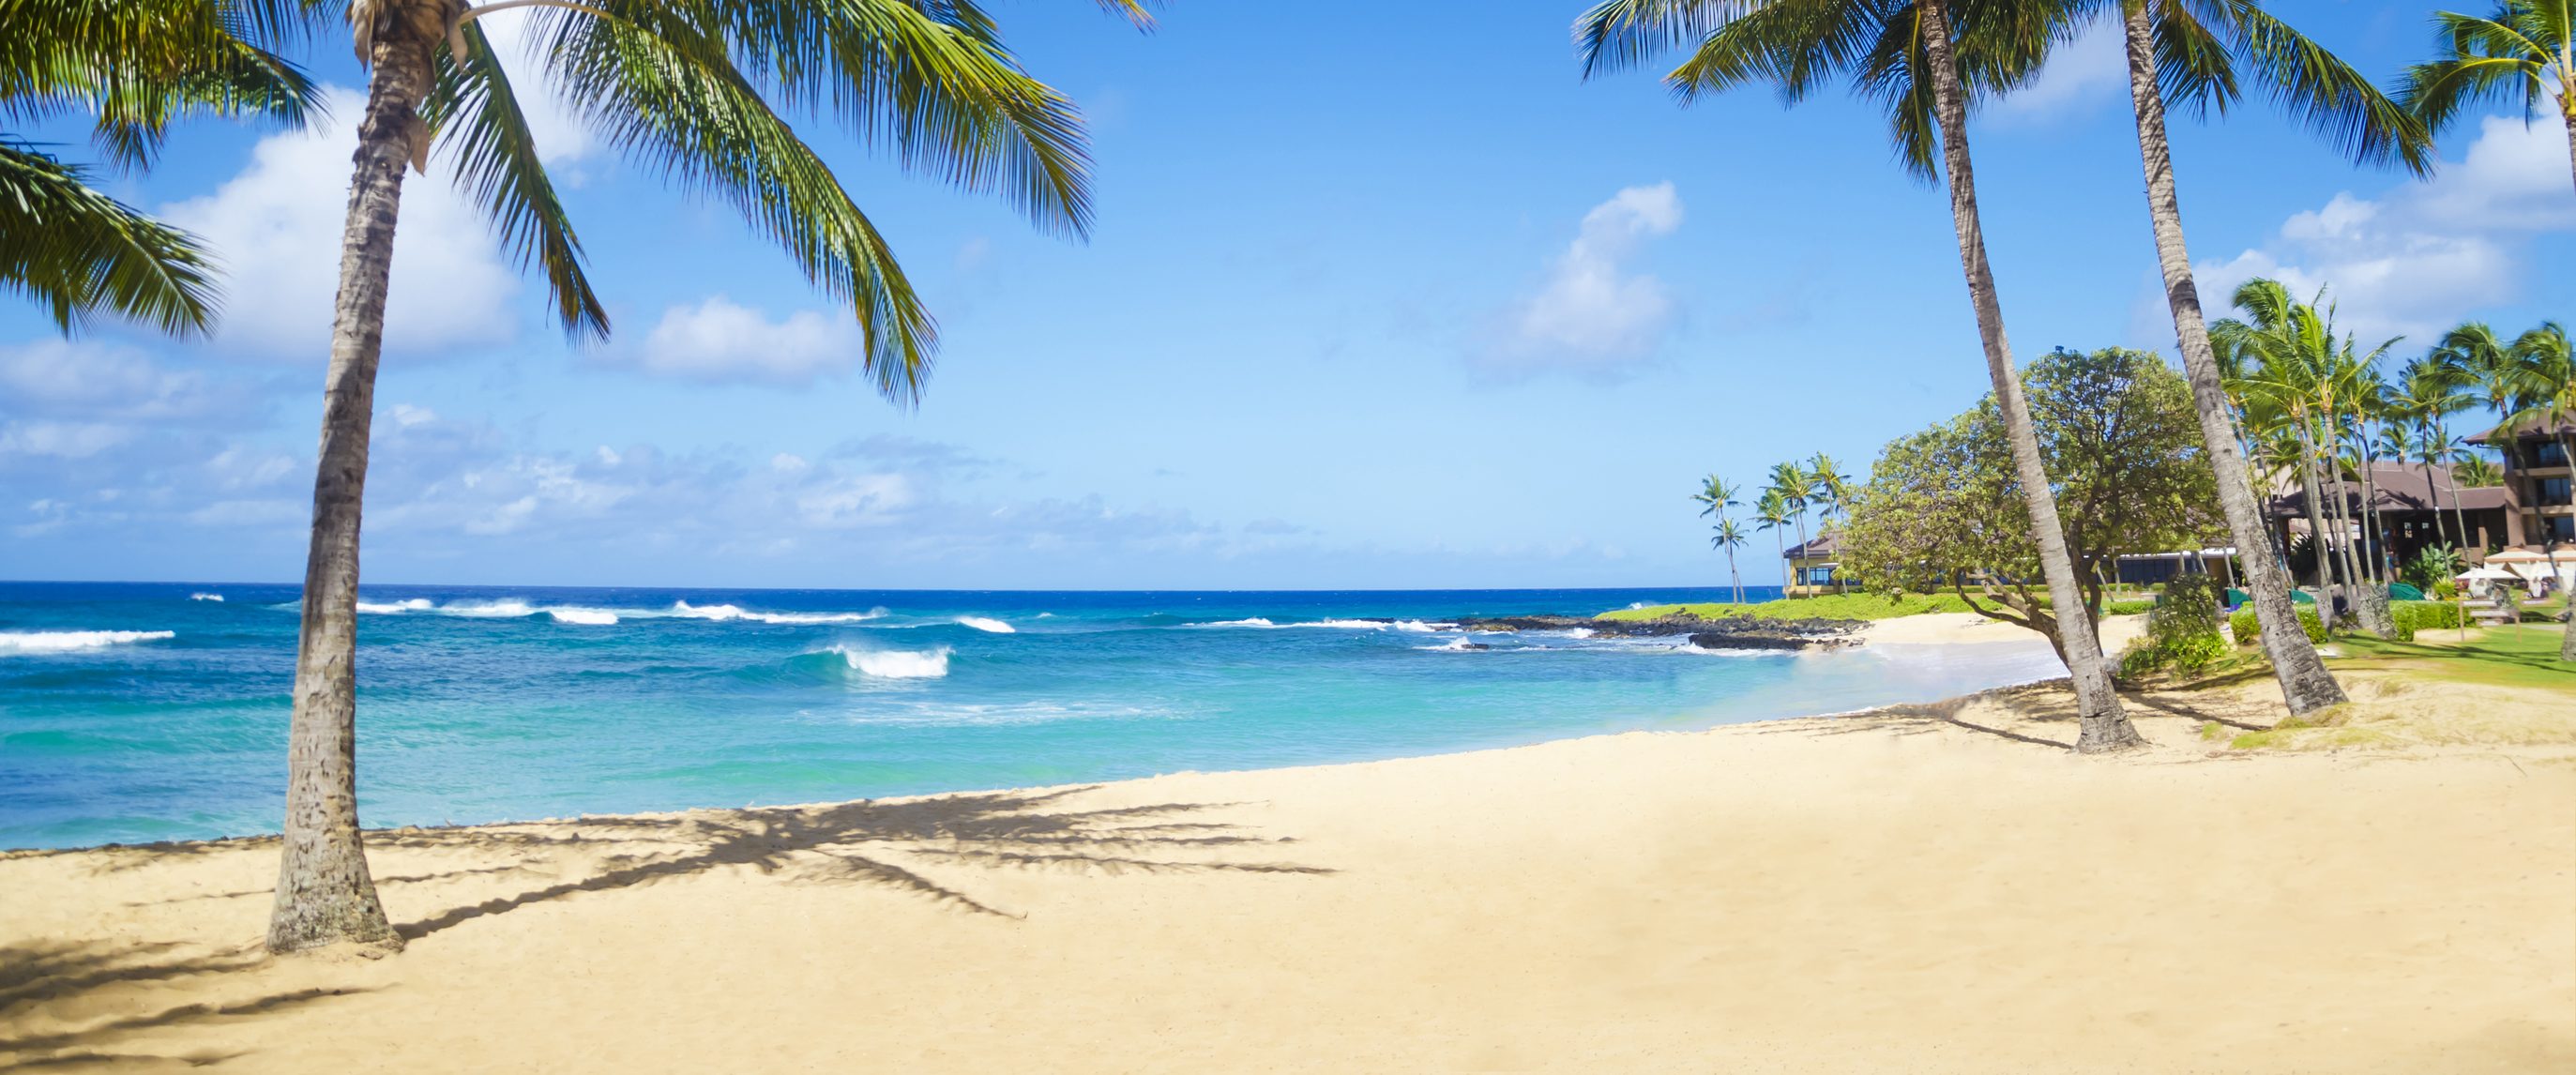 Flights to Kauai in the $300s to $500s round-trip!